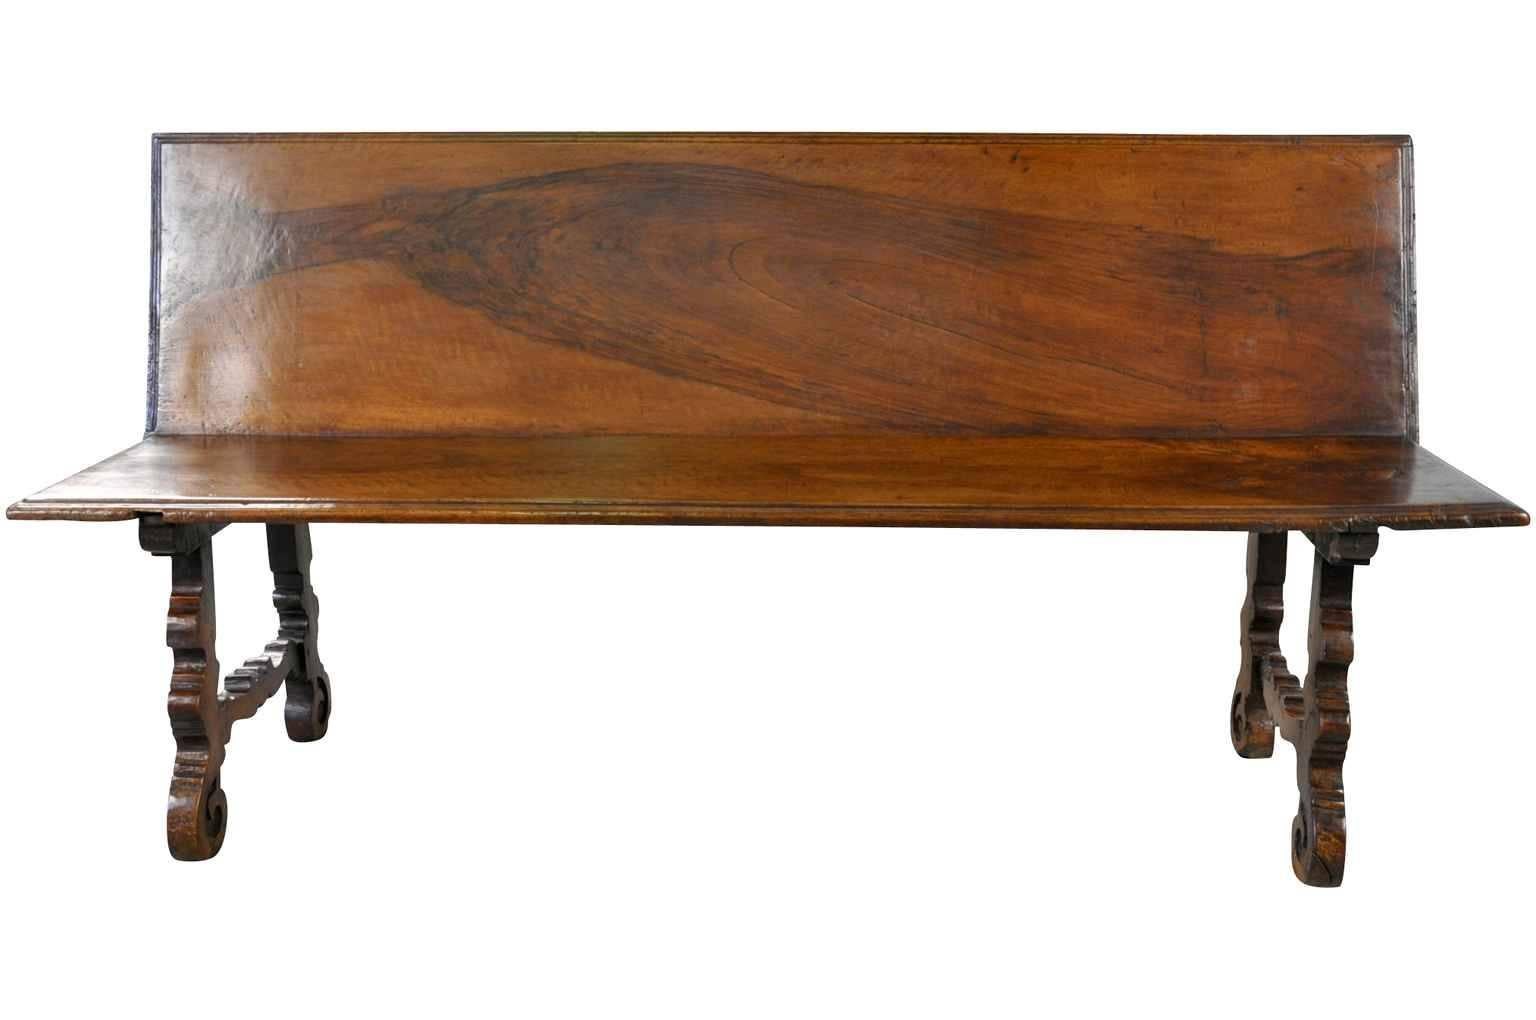 A very handsome bench from the Catalan region of Spain. Wonderfully constructed with solid boards of walnut. The patina is sumptuous and luminous - fabulous grain pattern.